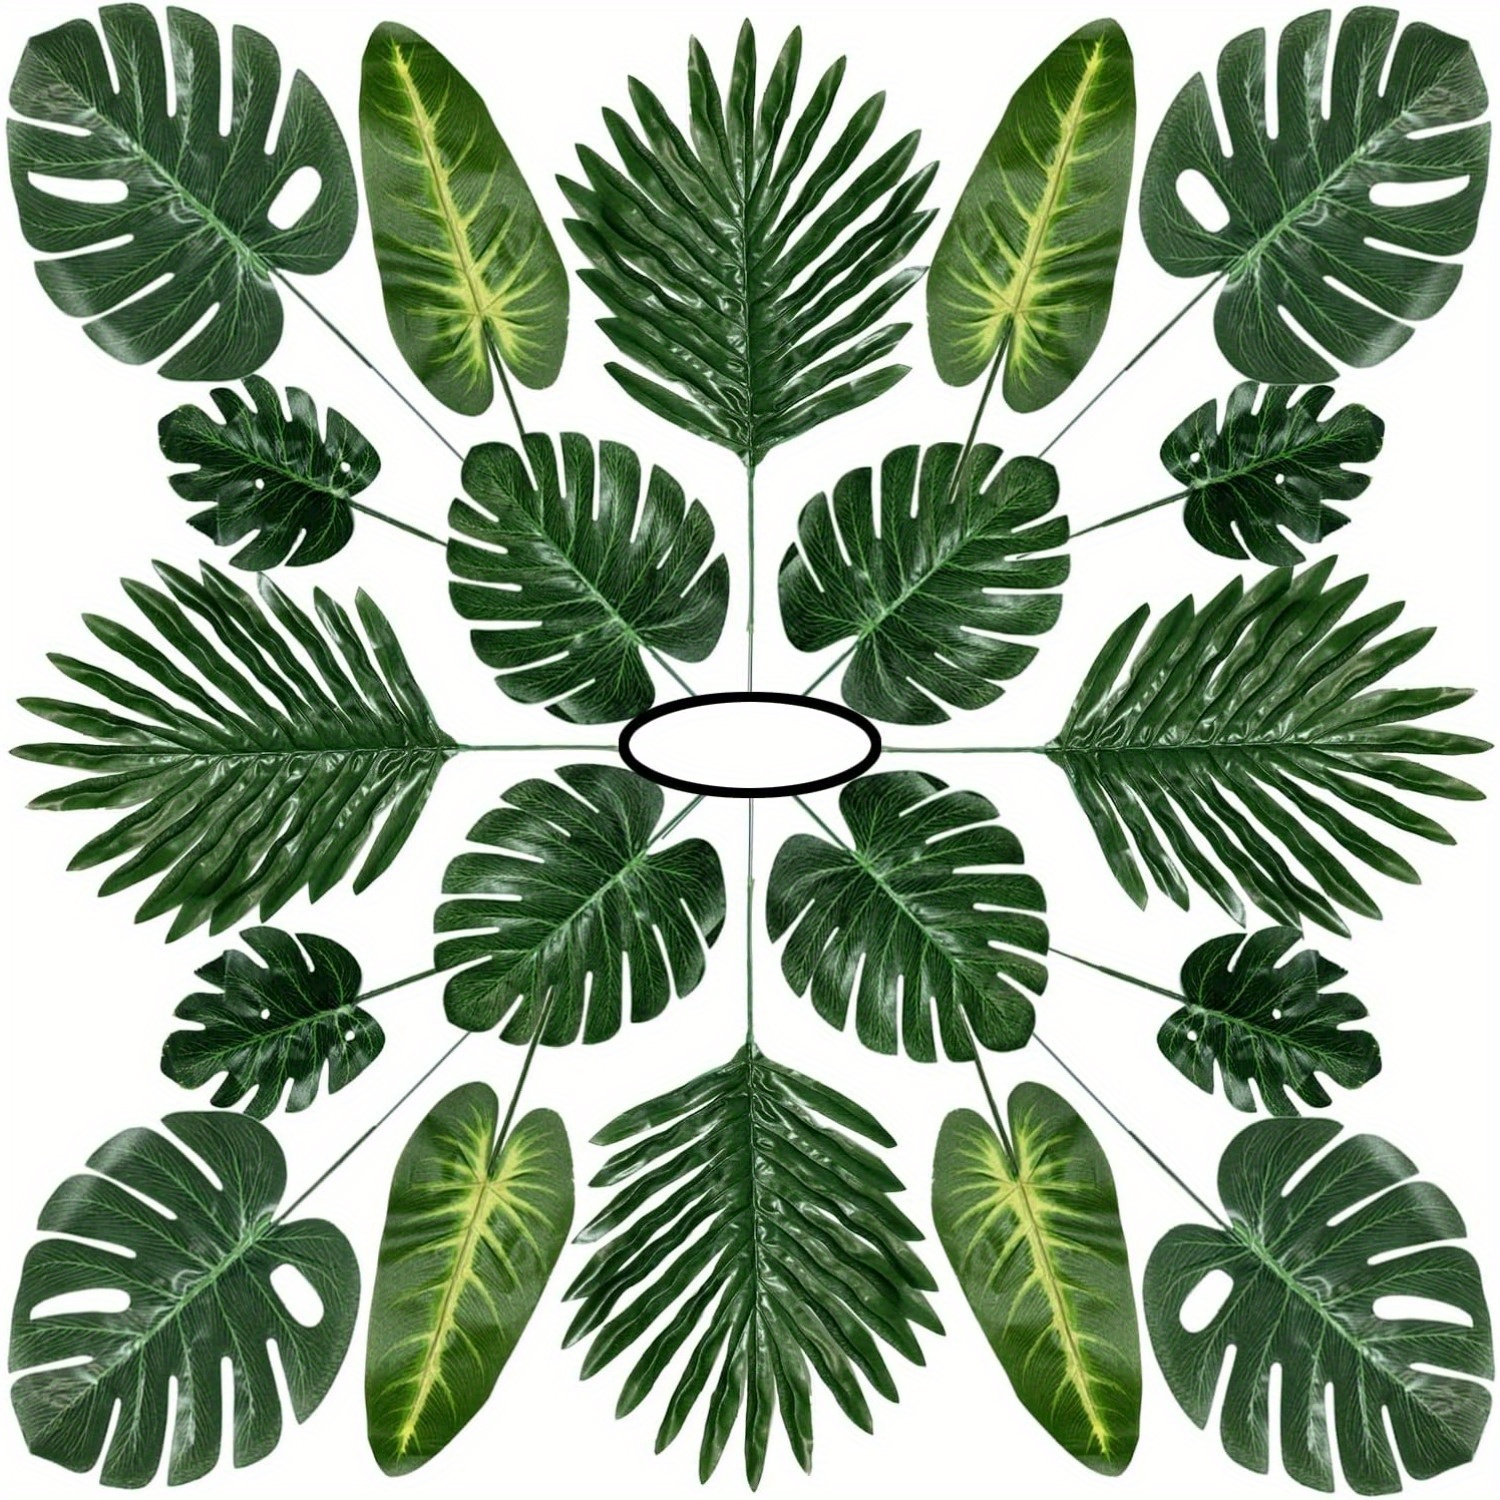 

60 Pcs Tropical Artificial Palm Leaves Set With Stems, 5 Styles, Plastic Faux Monstera & Safari Greenery, Luau Party Supplies, Hawaiian Jungle Beach Table Decor, Reunion Event Centerpieces